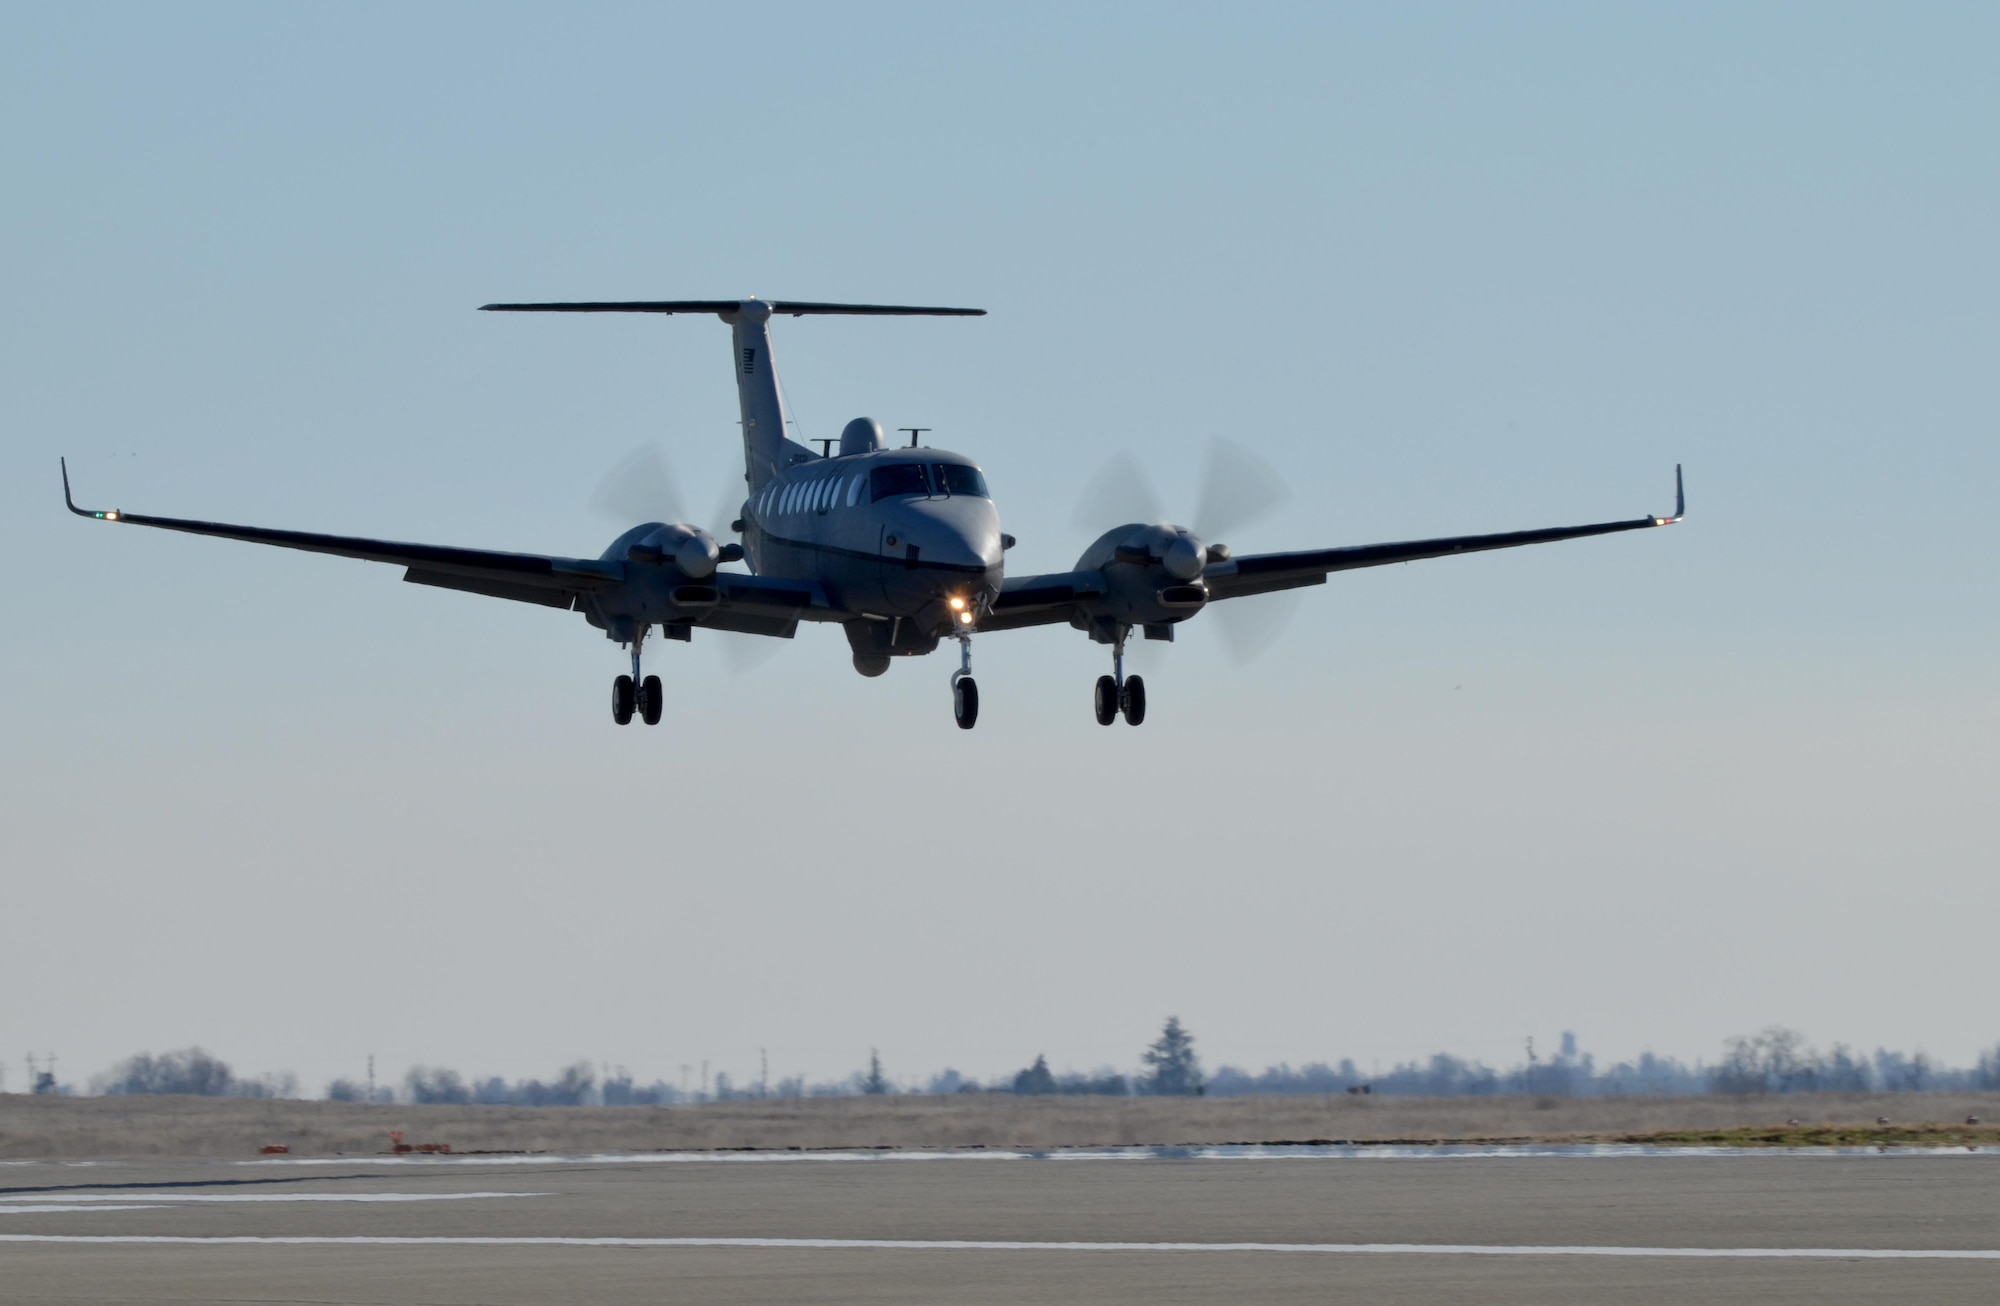 An MC-12W Liberty makes its final approach at Beale Air Force Base, Calif., Jan. 22, 2014. The Liberty’s primary mission is to provide intelligence, surveillance and reconnaissance, or ISR, support directly to ground forces. (U.S. Air Force photo by Airman 1st Class Bobby Cummings/Released)